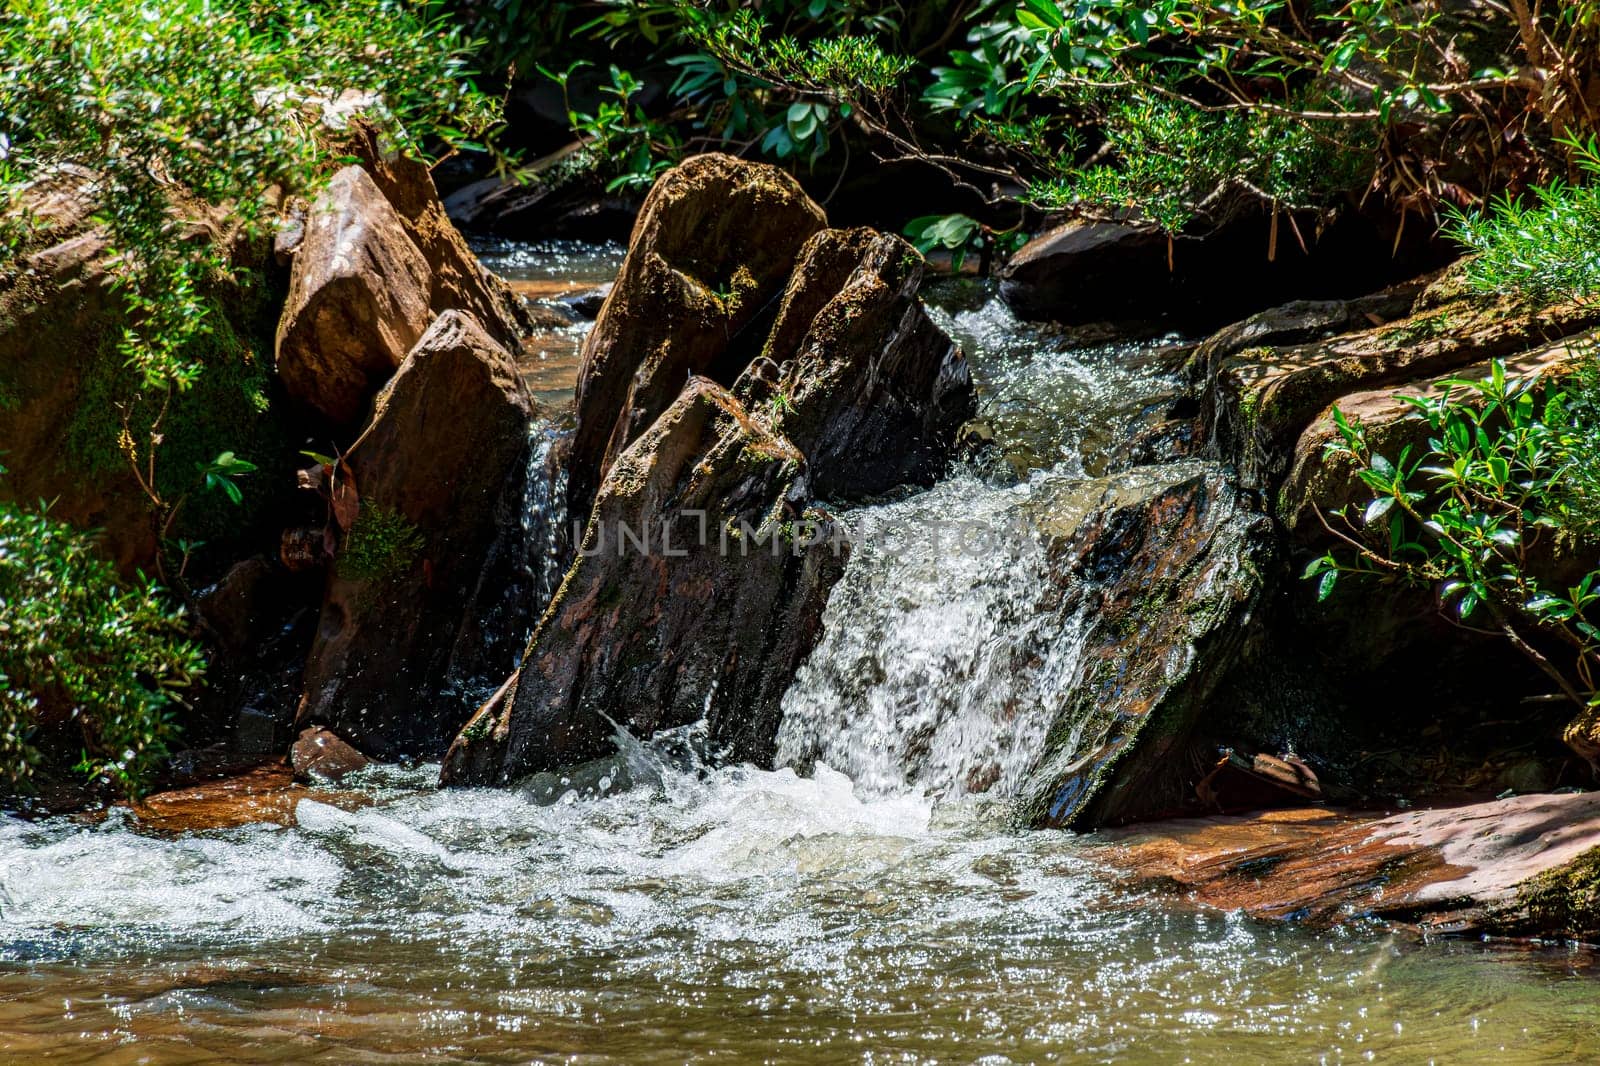 River running through the forest among the rocks and vegetation in the state of Minas Gerais, Brazil